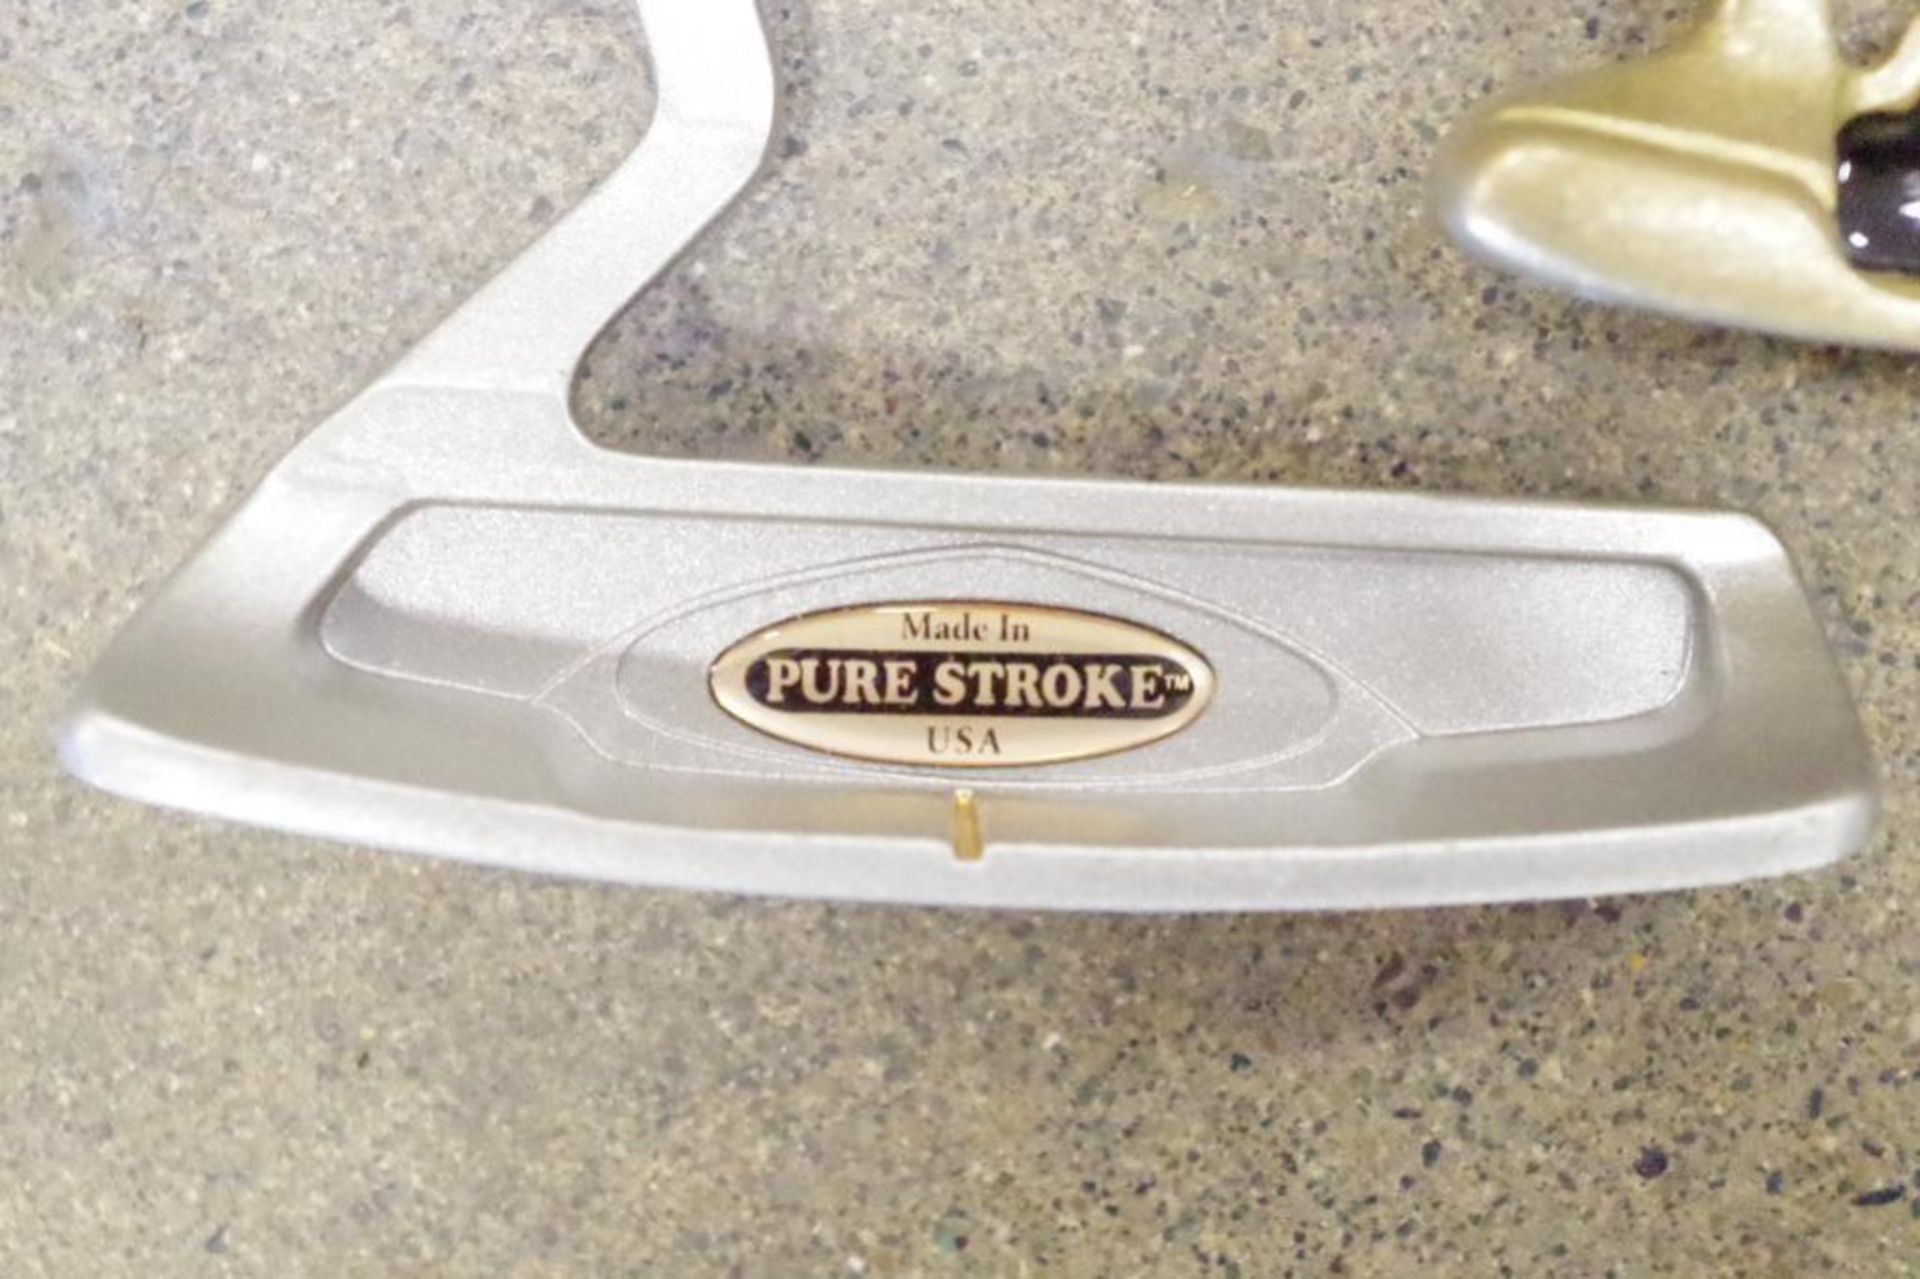 (2) NEW PURE STROKE Putters, 1-Gold, 1-Silver Colored, Made in USA - Image 2 of 5